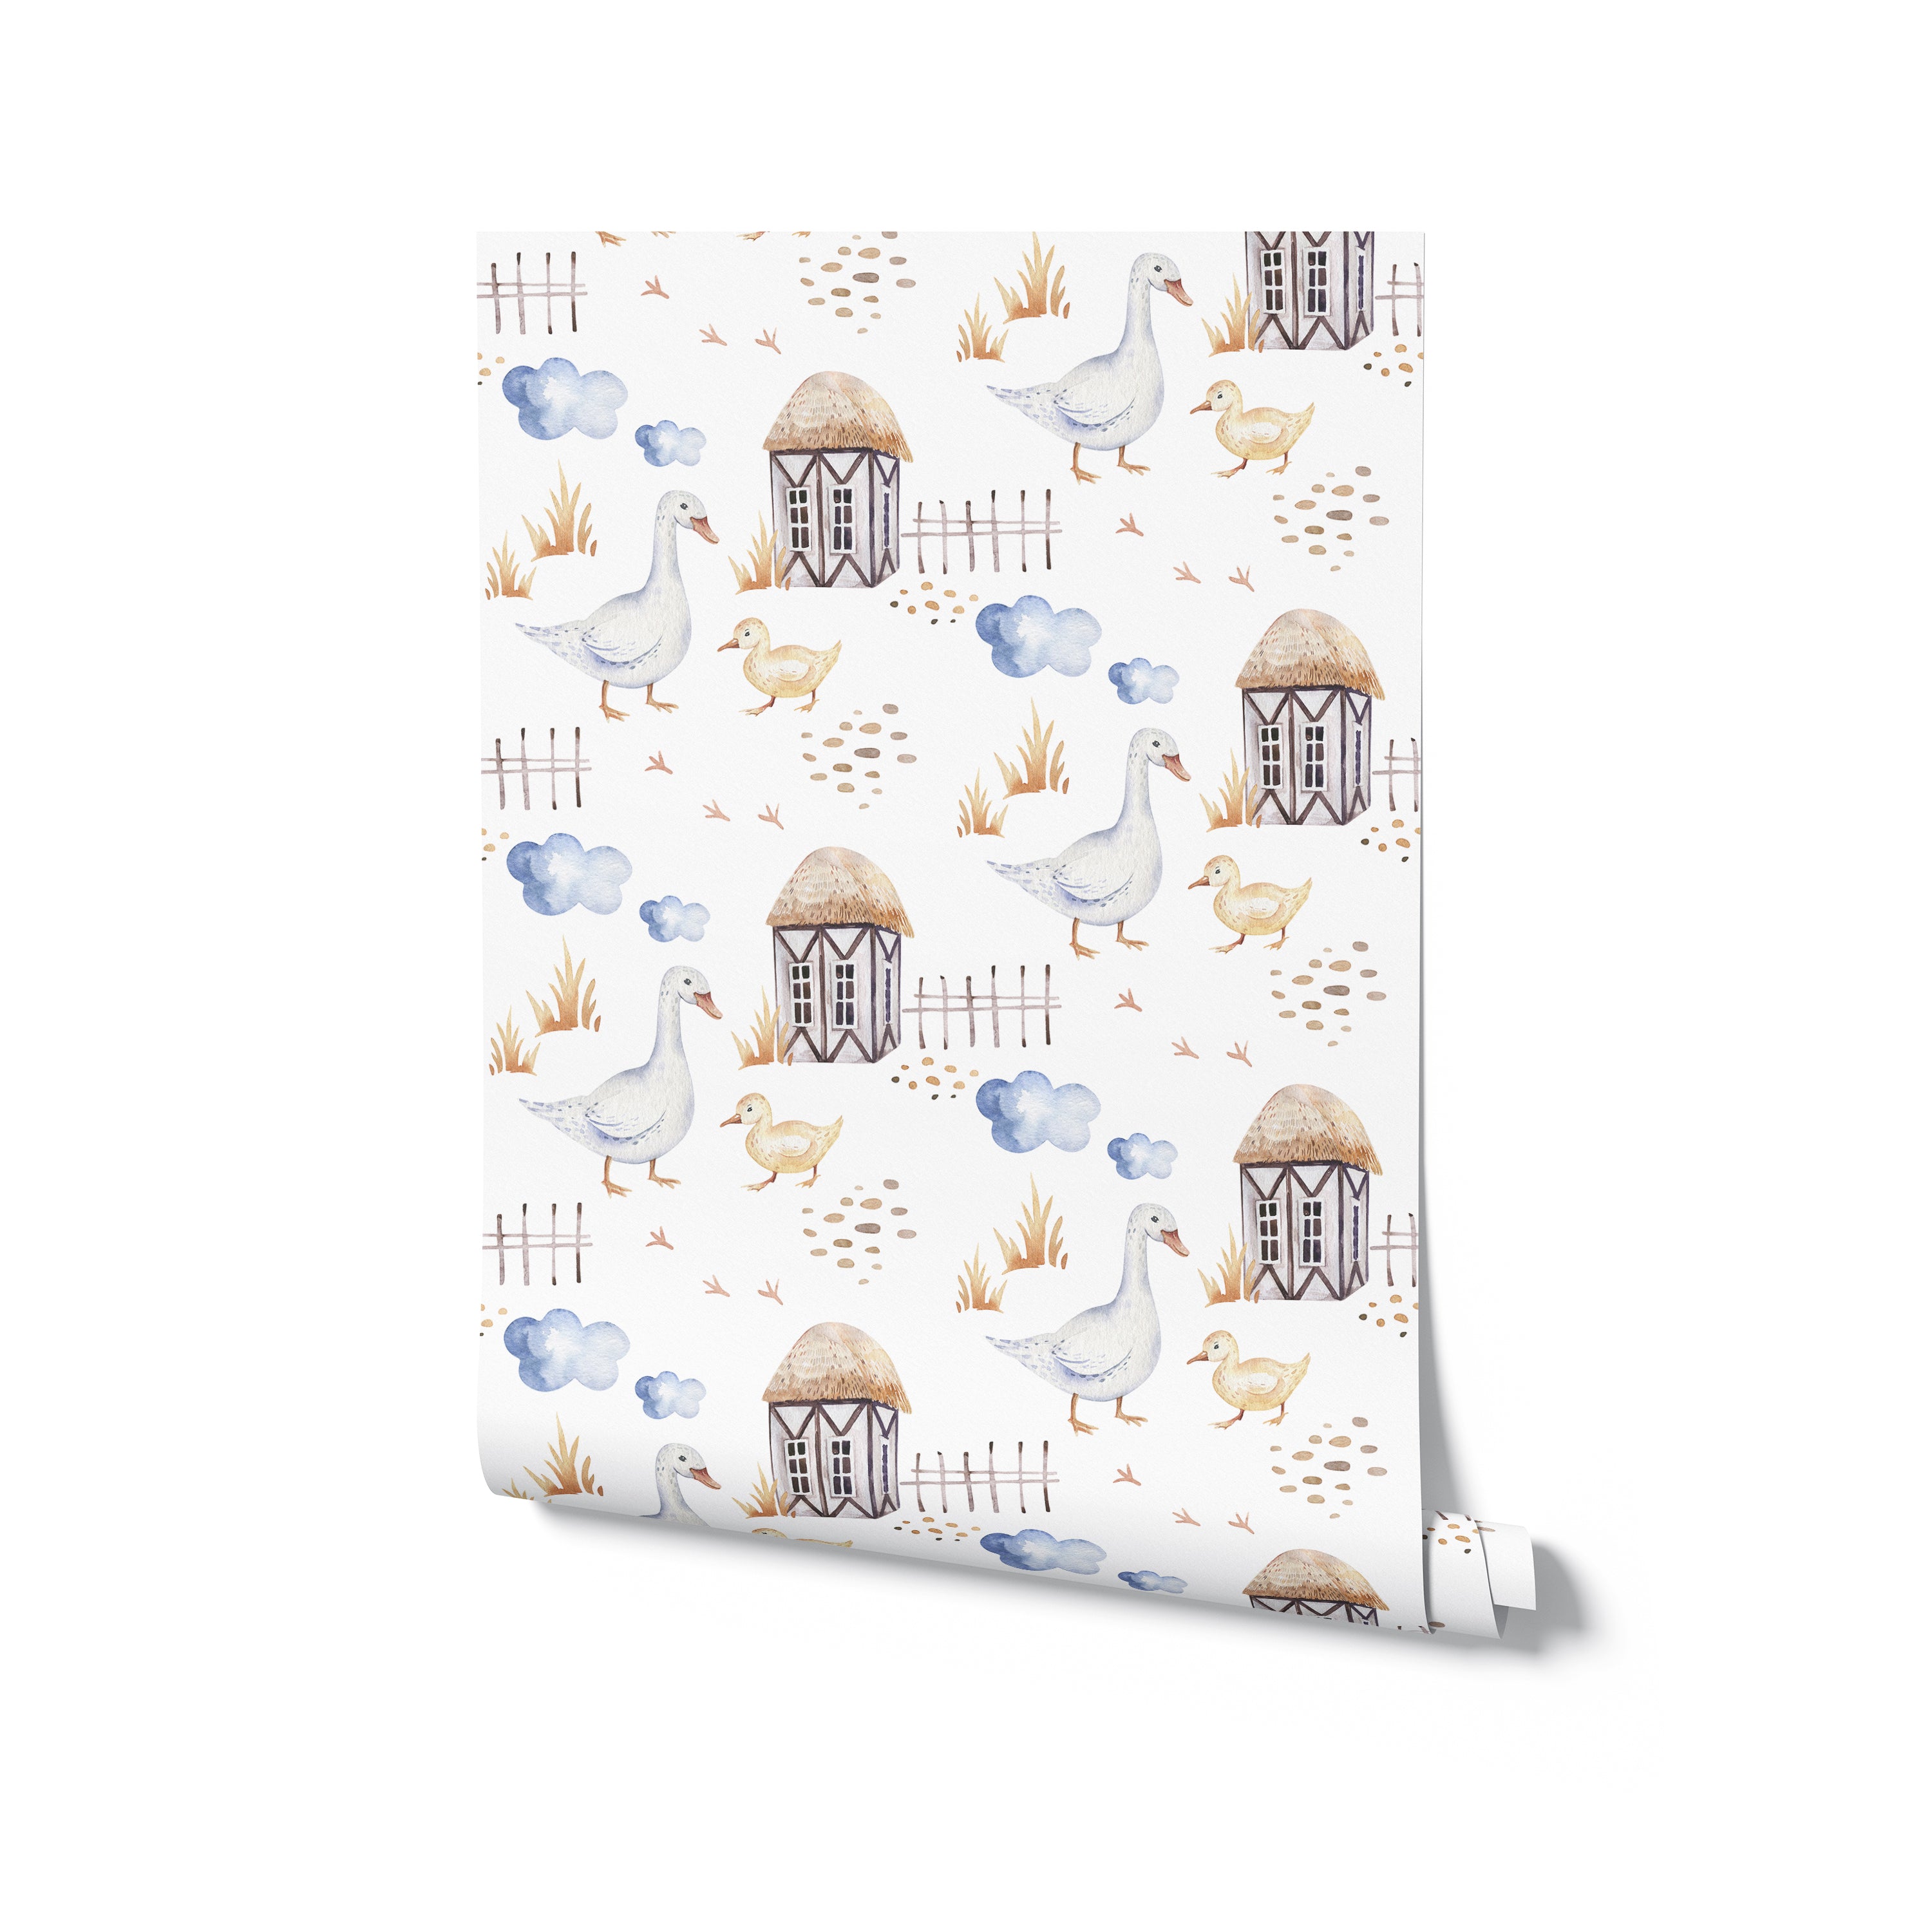 Roll of 'Watercolor Farm Animals VI' wallpaper showing a detailed and whimsical farm scene with geese, chicks, farmhouses, and clouds in soft watercolor tones on a white background, ideal for adding a touch of rustic charm to any room